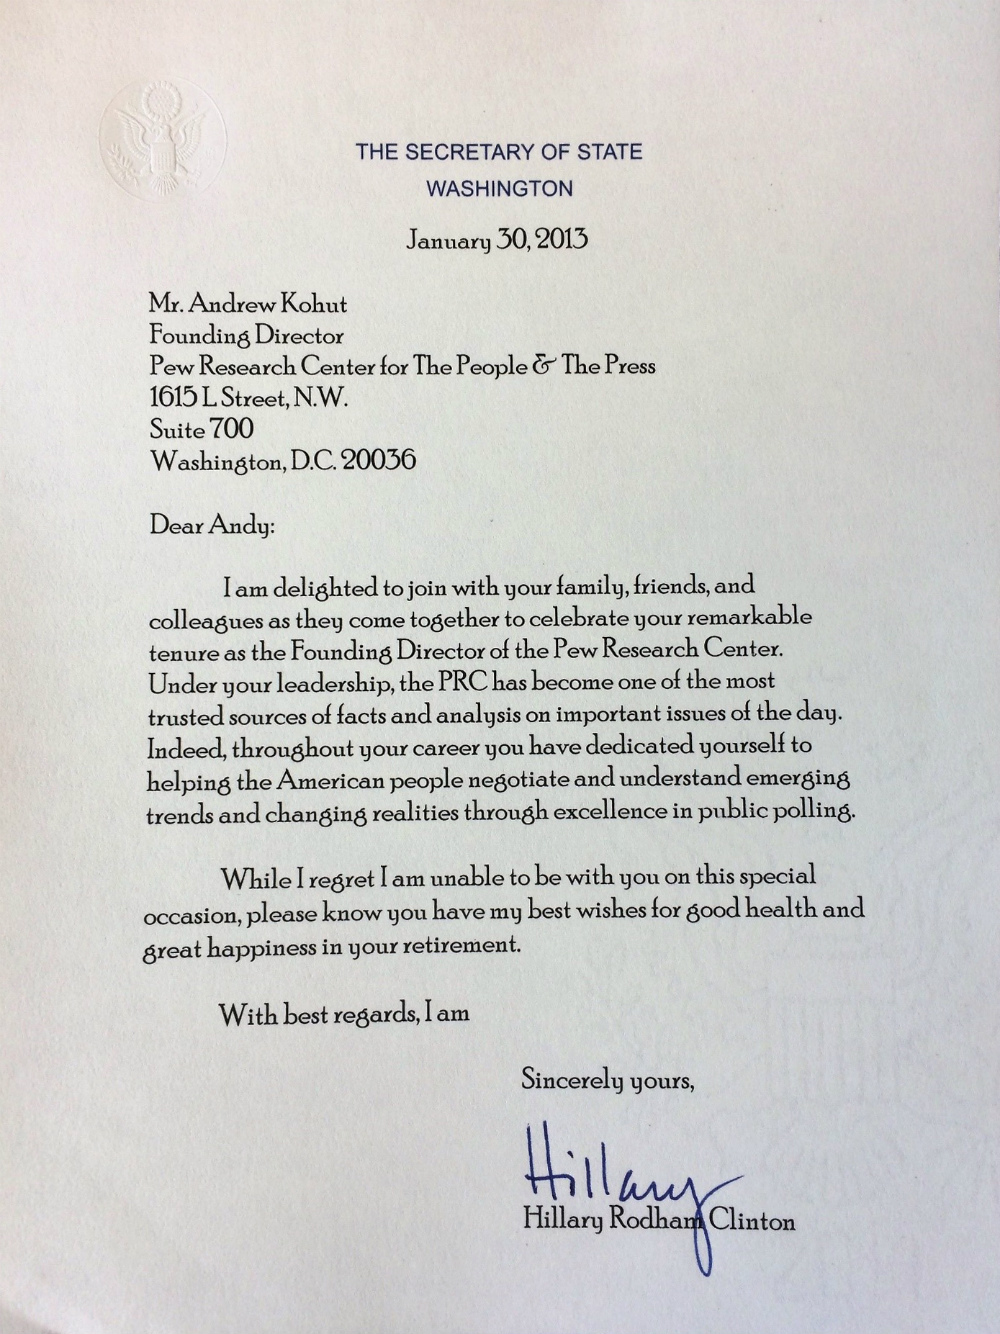 letter from Hillary Clinton to Andrew Kohut